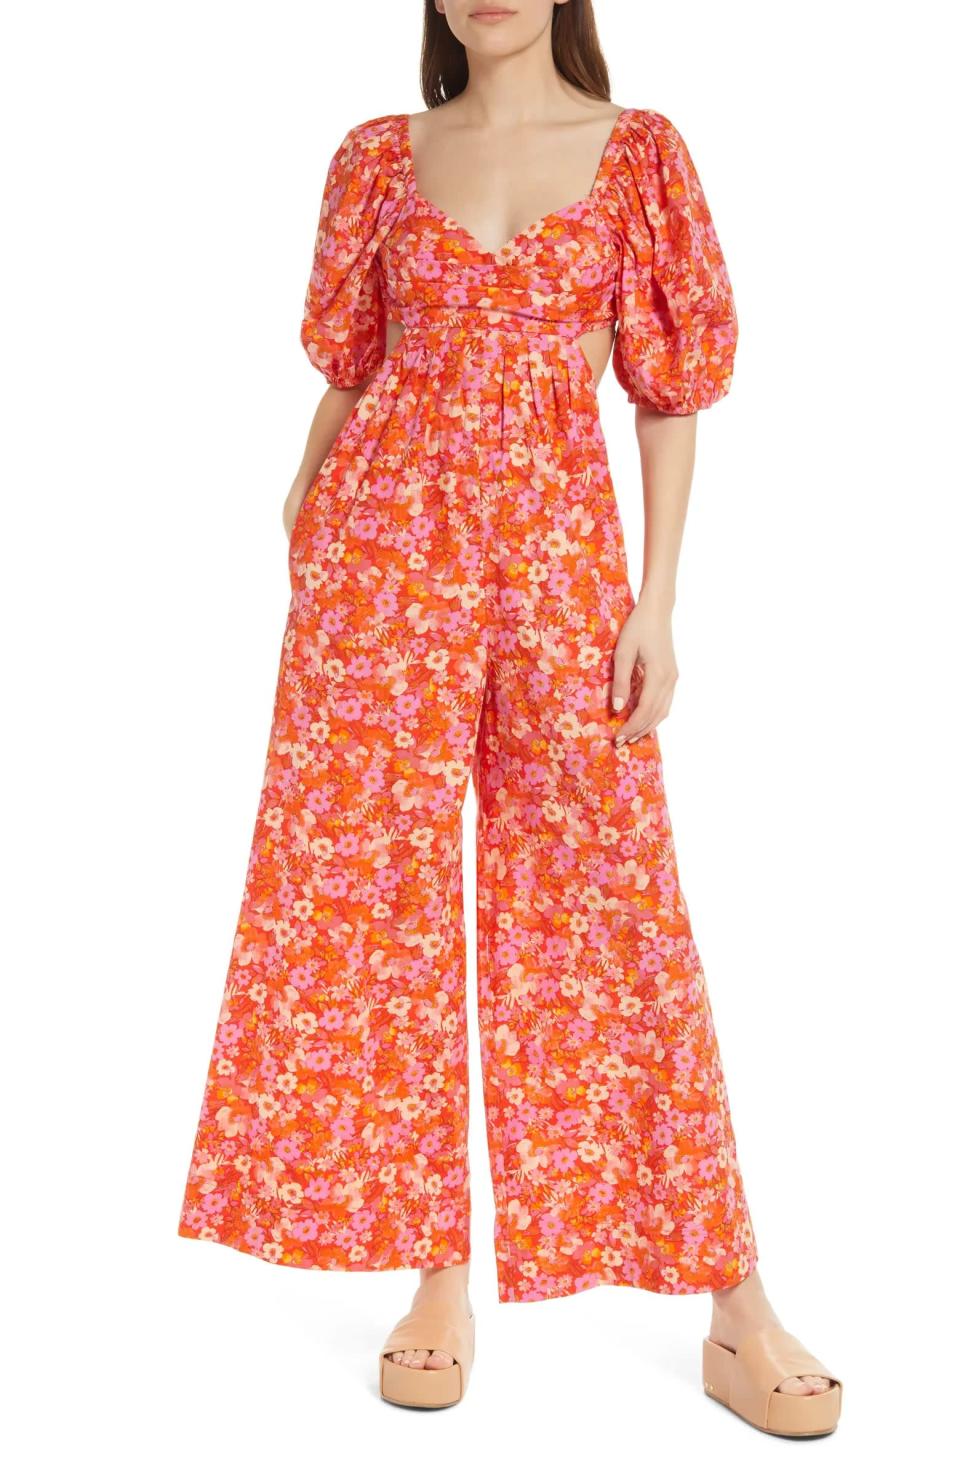 <p>Headed to brunch or wine tasting? This gorgeous <span>Free People Amy Floral Cotton Jumpsuit</span> ($100, originally $168) looks great with sandals. Make sure to check out the back as well - it has a cute strappy detail.</p>